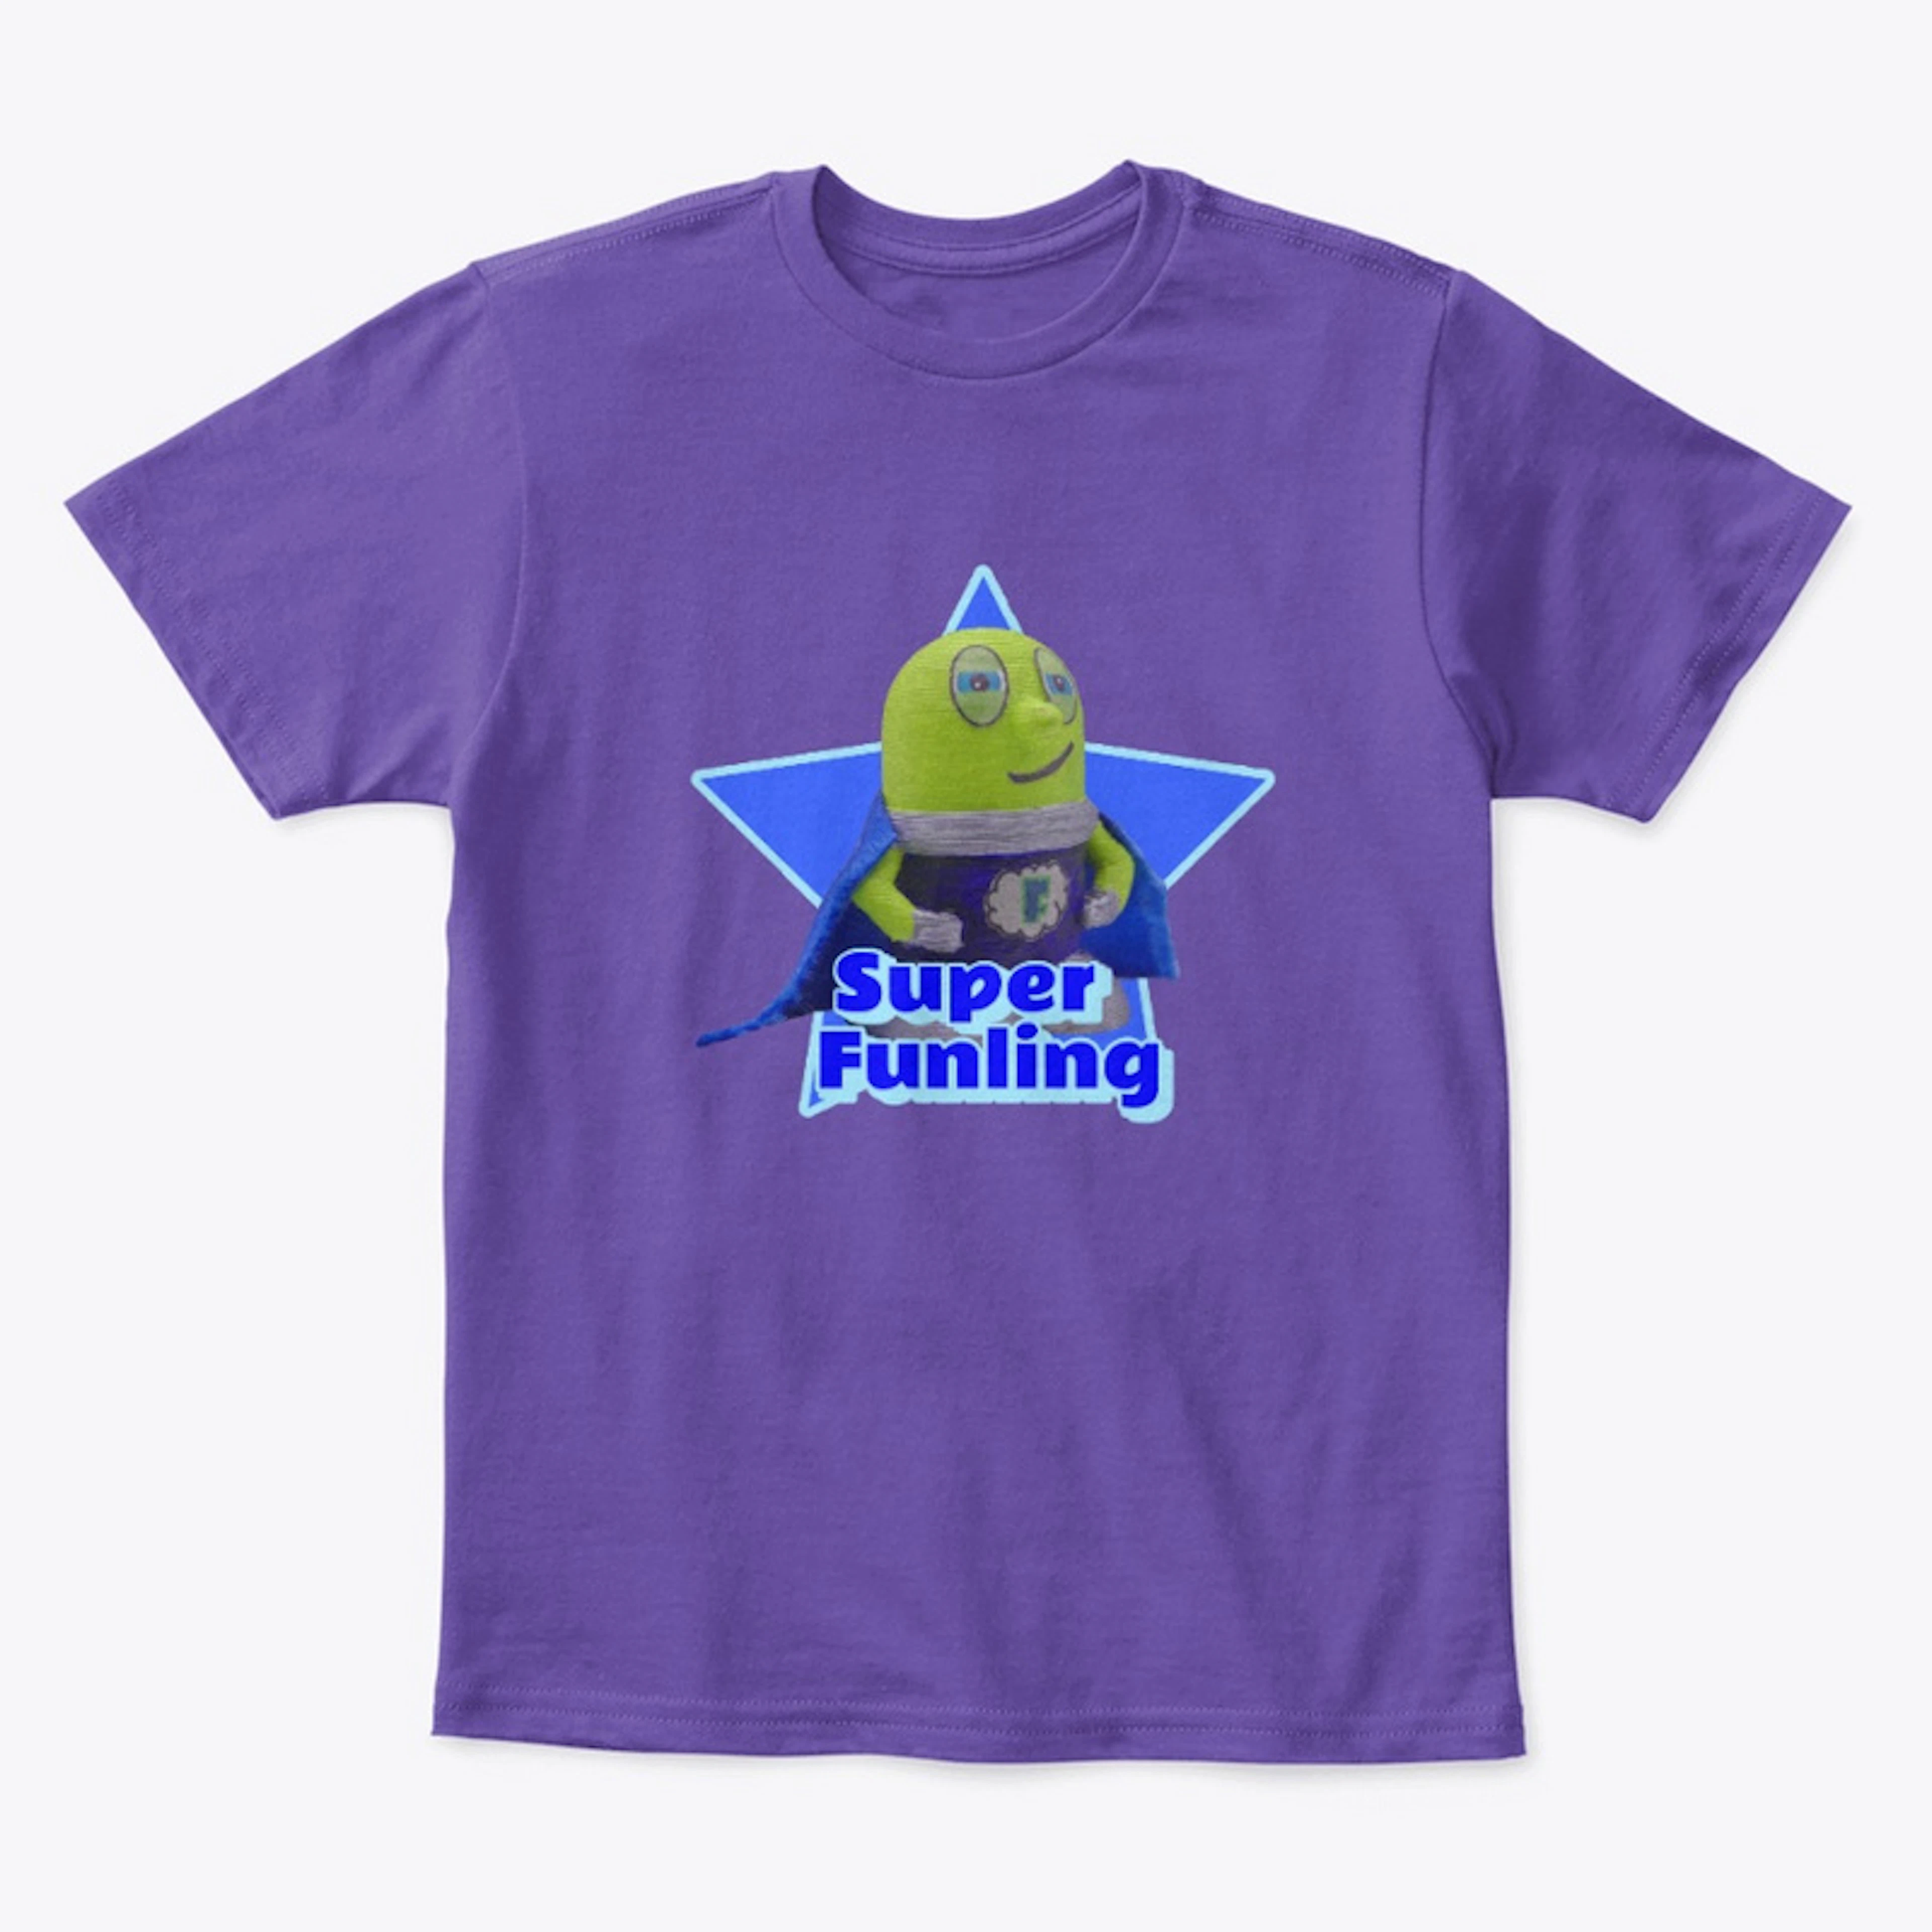 Kids T-Shirt with Super Funling